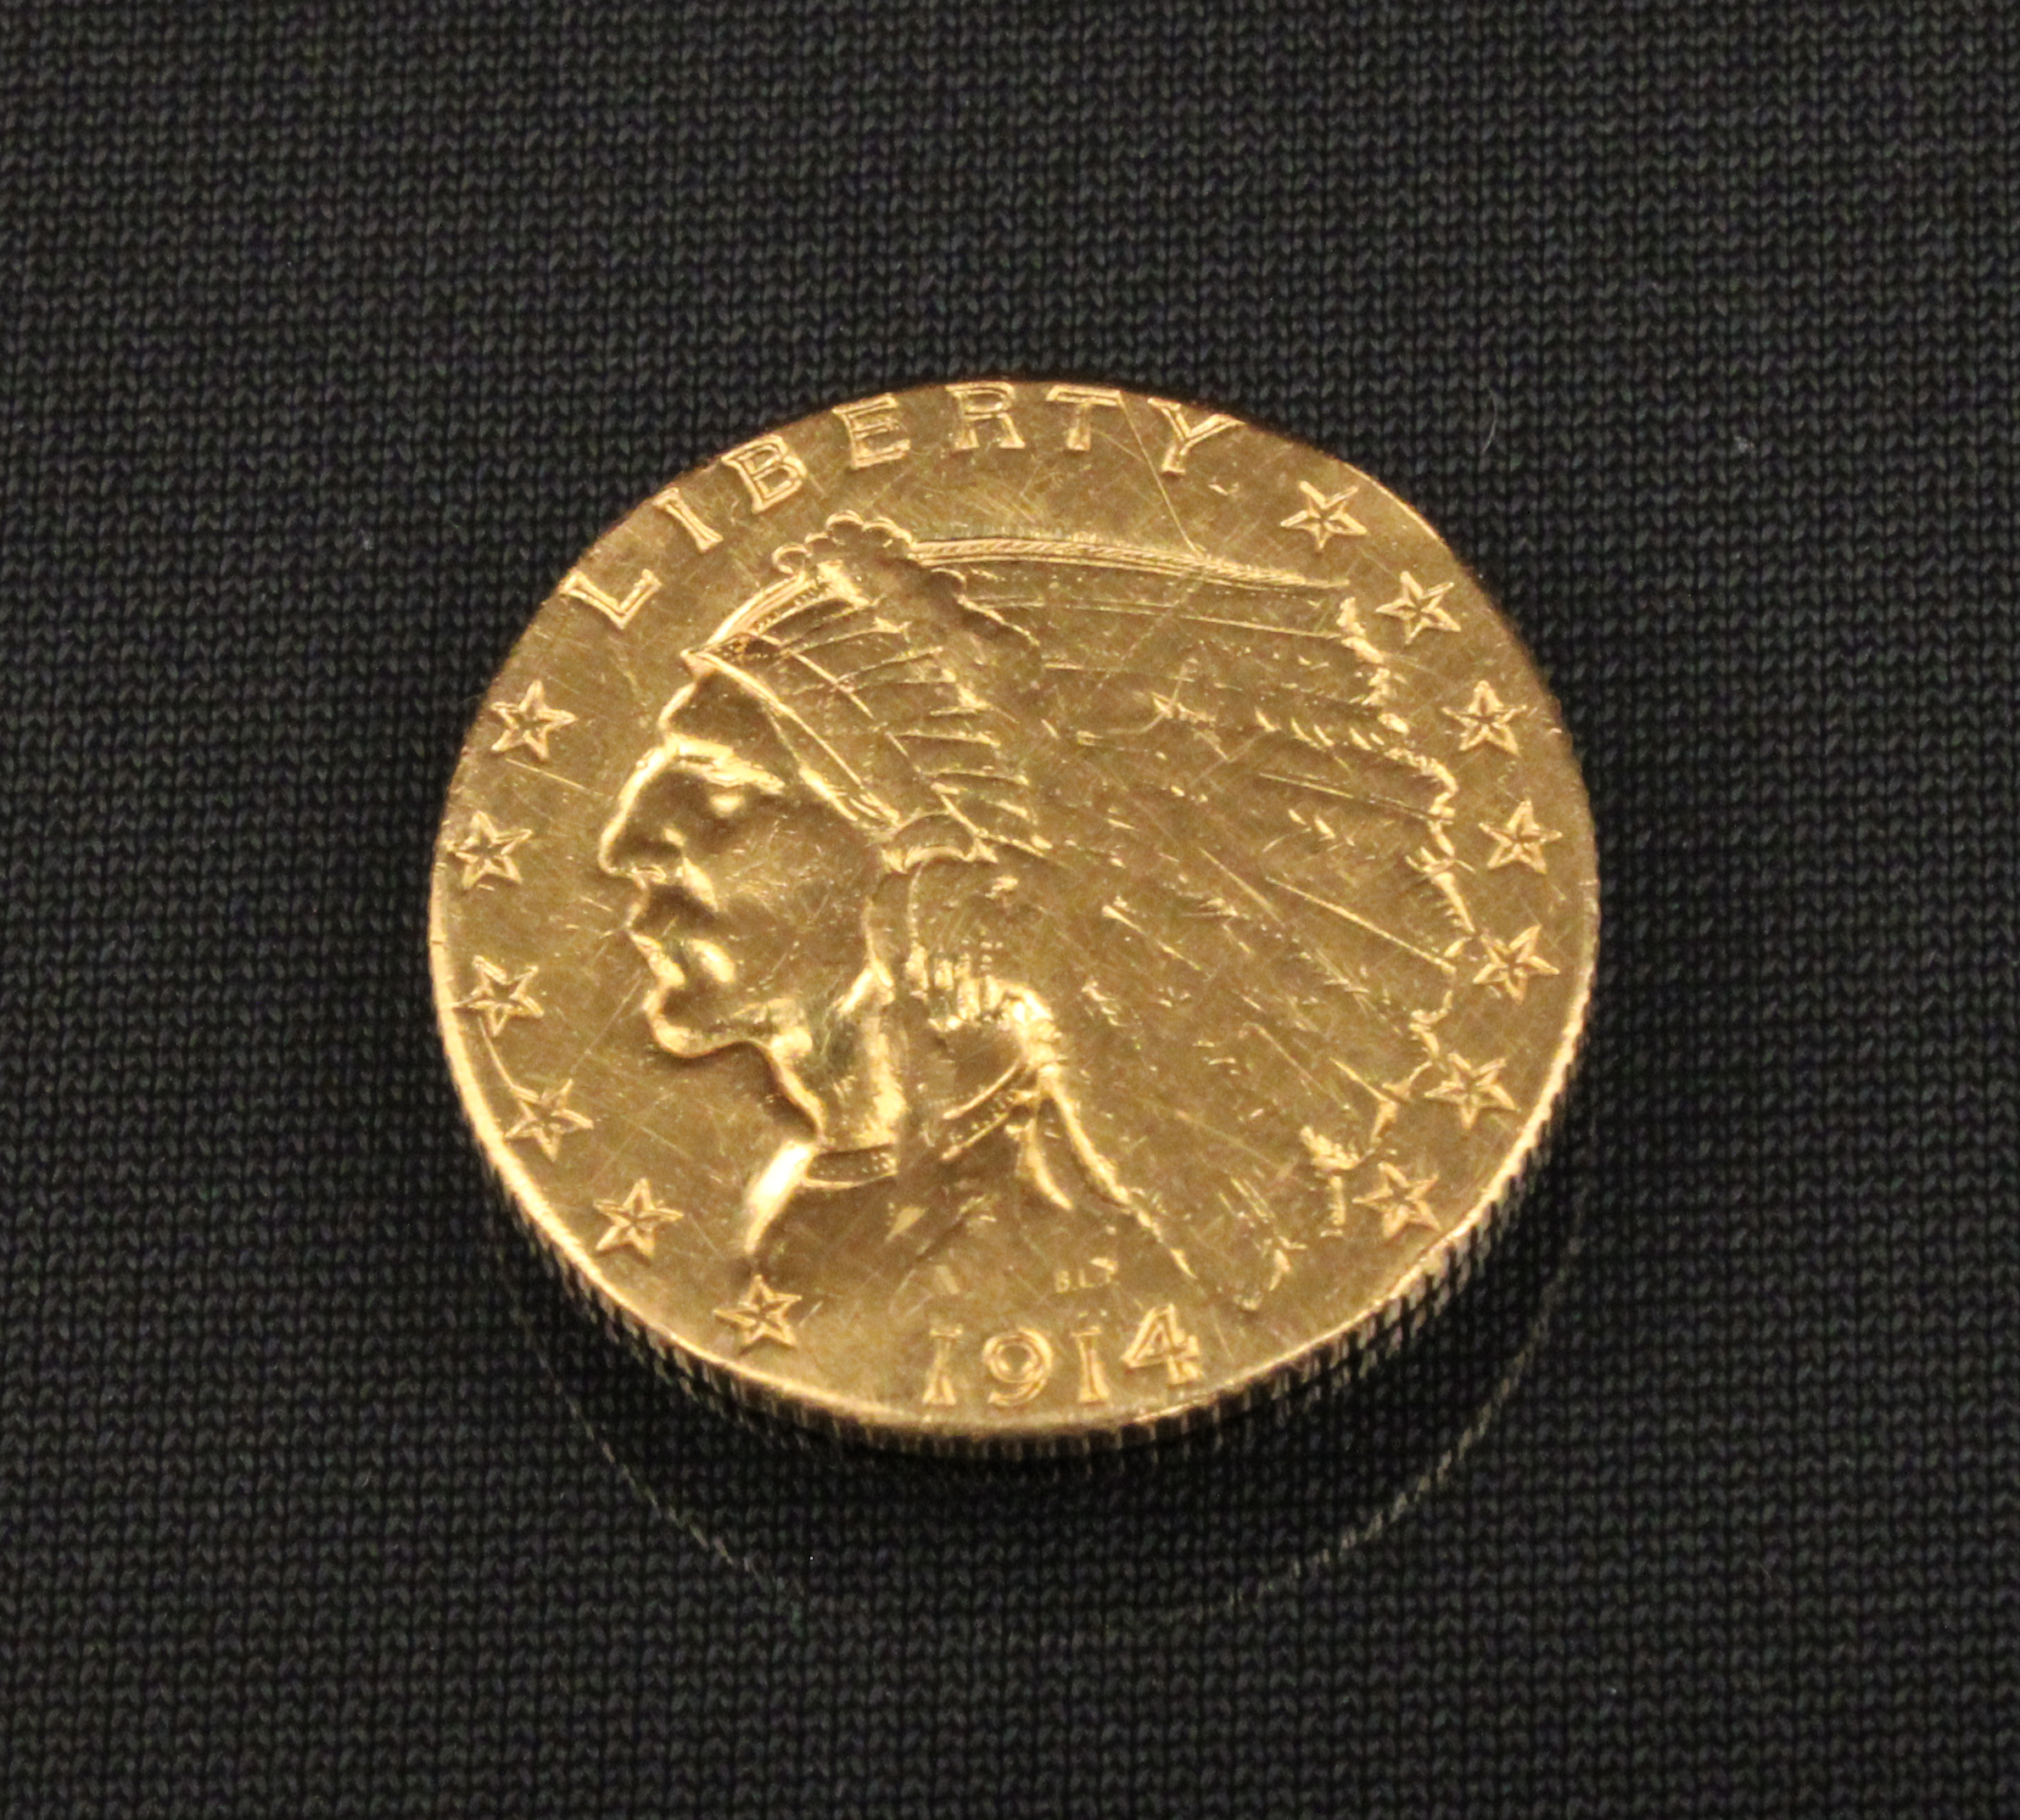 1914 INDIAN HEAD 2 50 GOLD COIN 35eb20